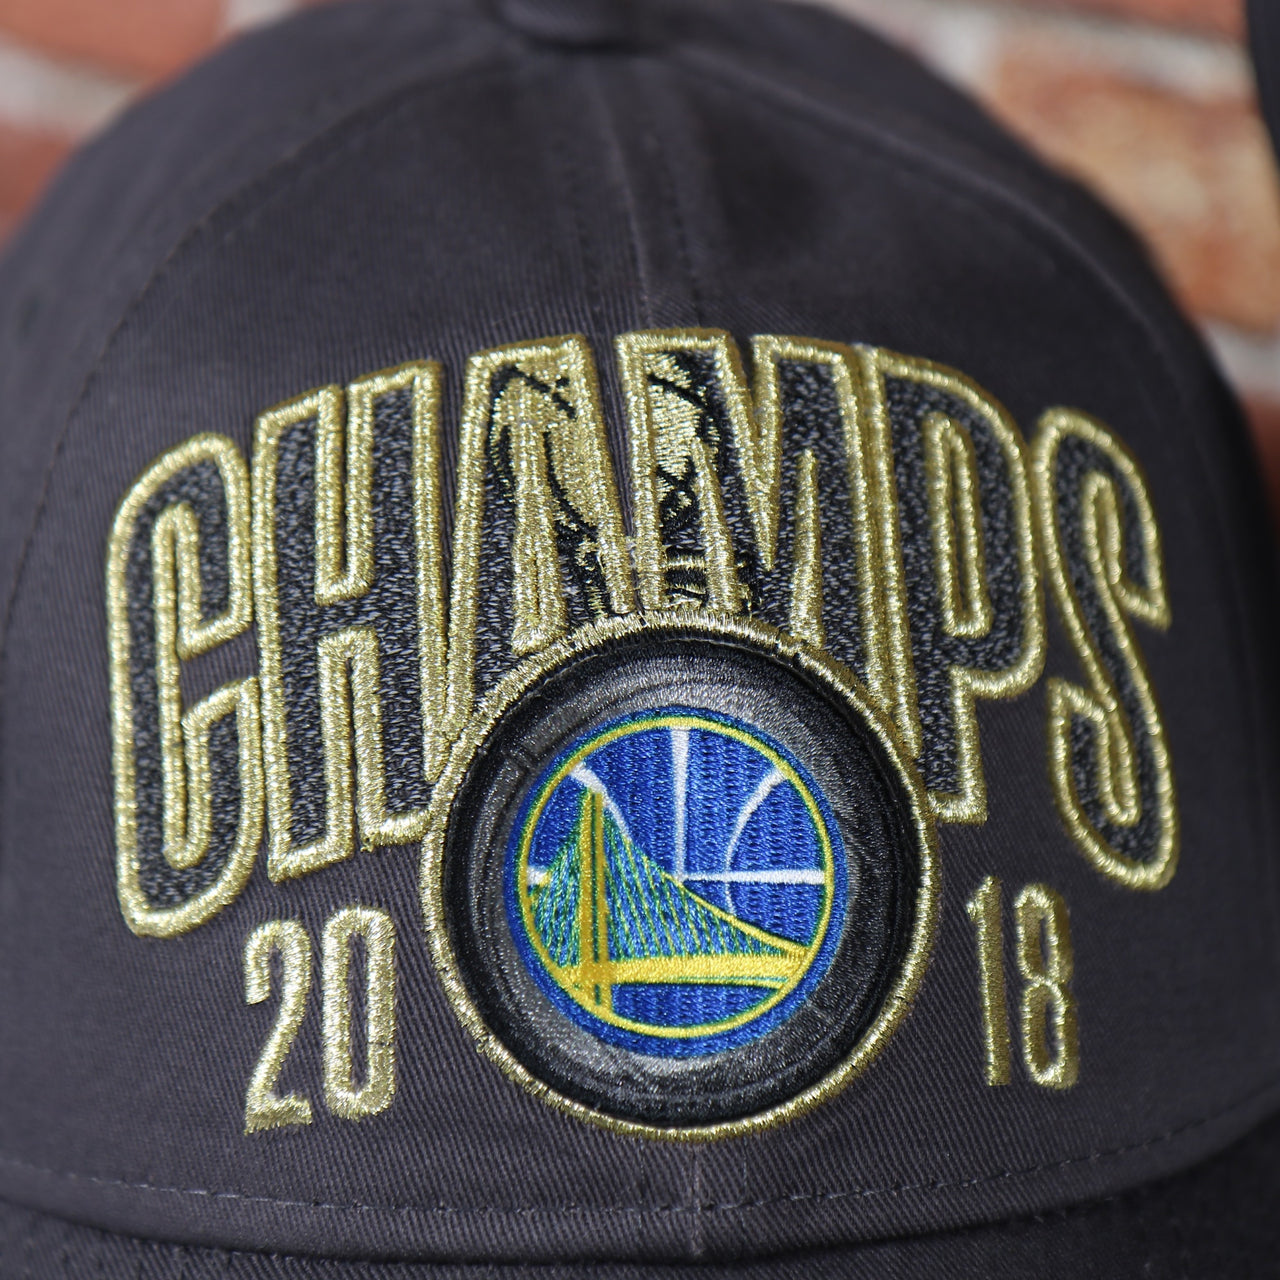 champs 2018 embroidery and warriors logo on the YOUTH 2018 NBA Finals Golden State Warriors Championship Kid's Snapback Hat